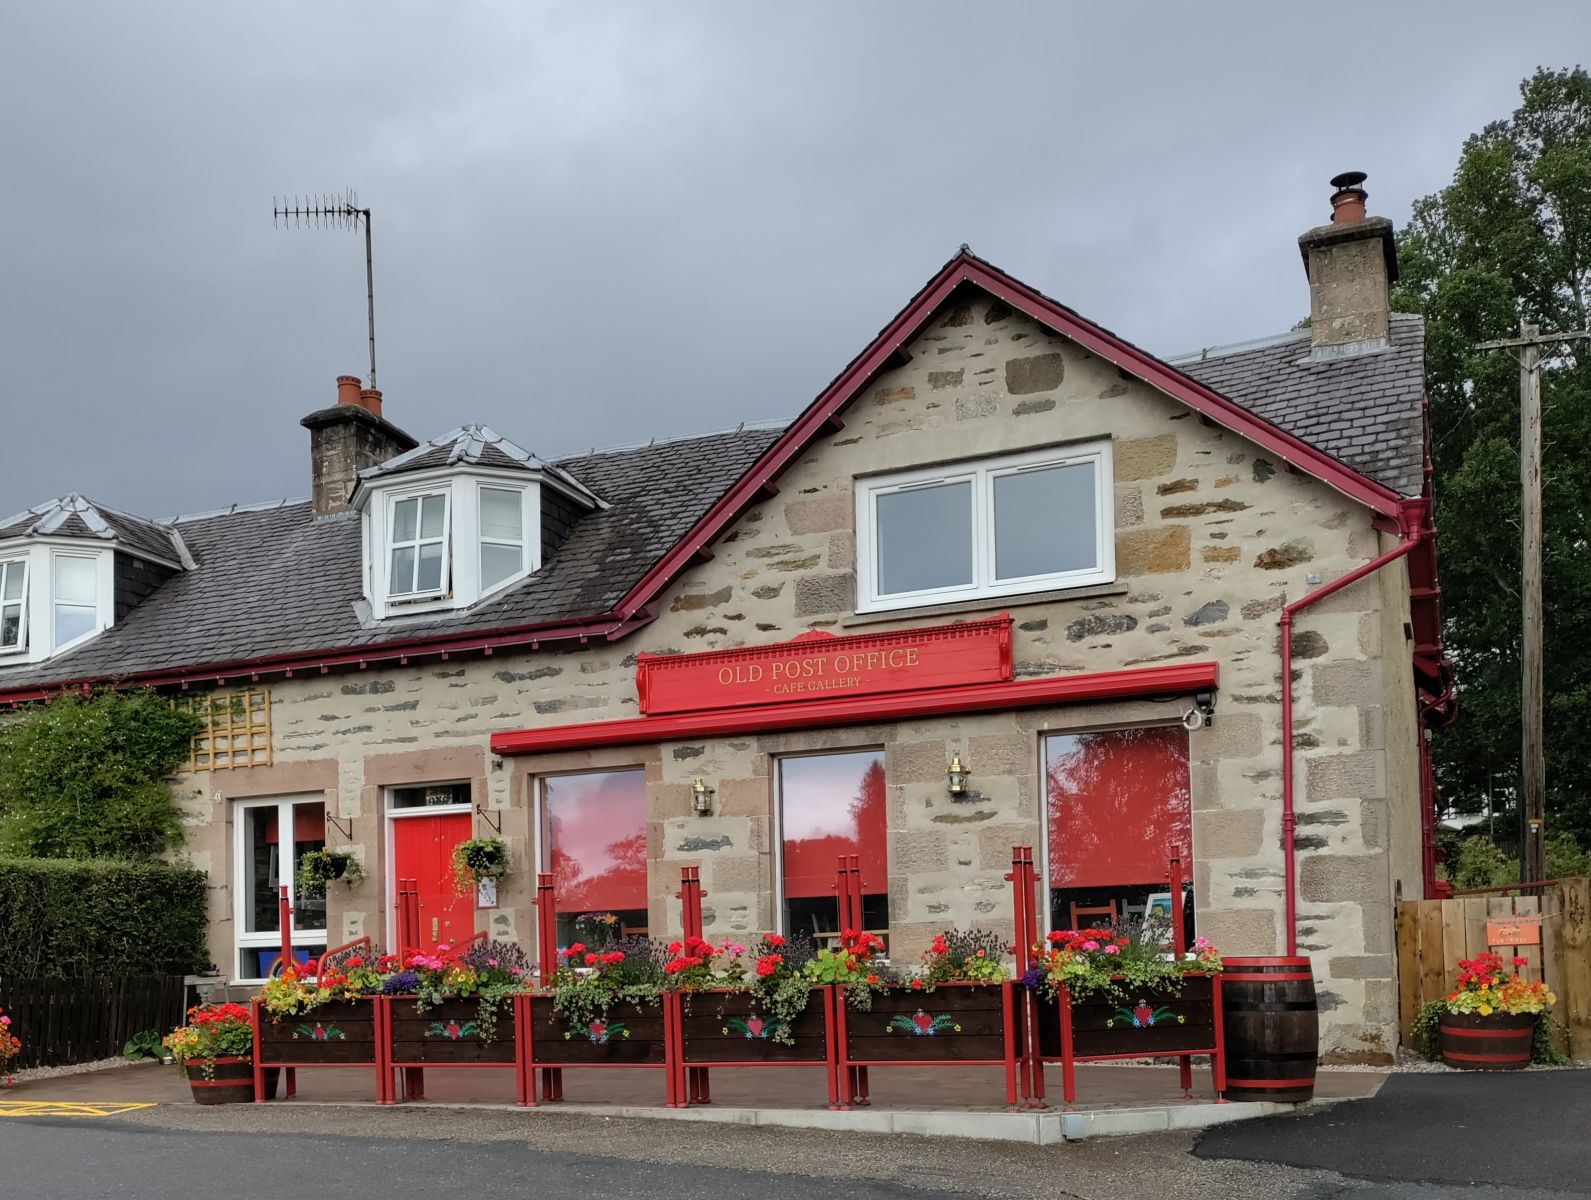 Photograph of the Kincraig Gallery and Cafe